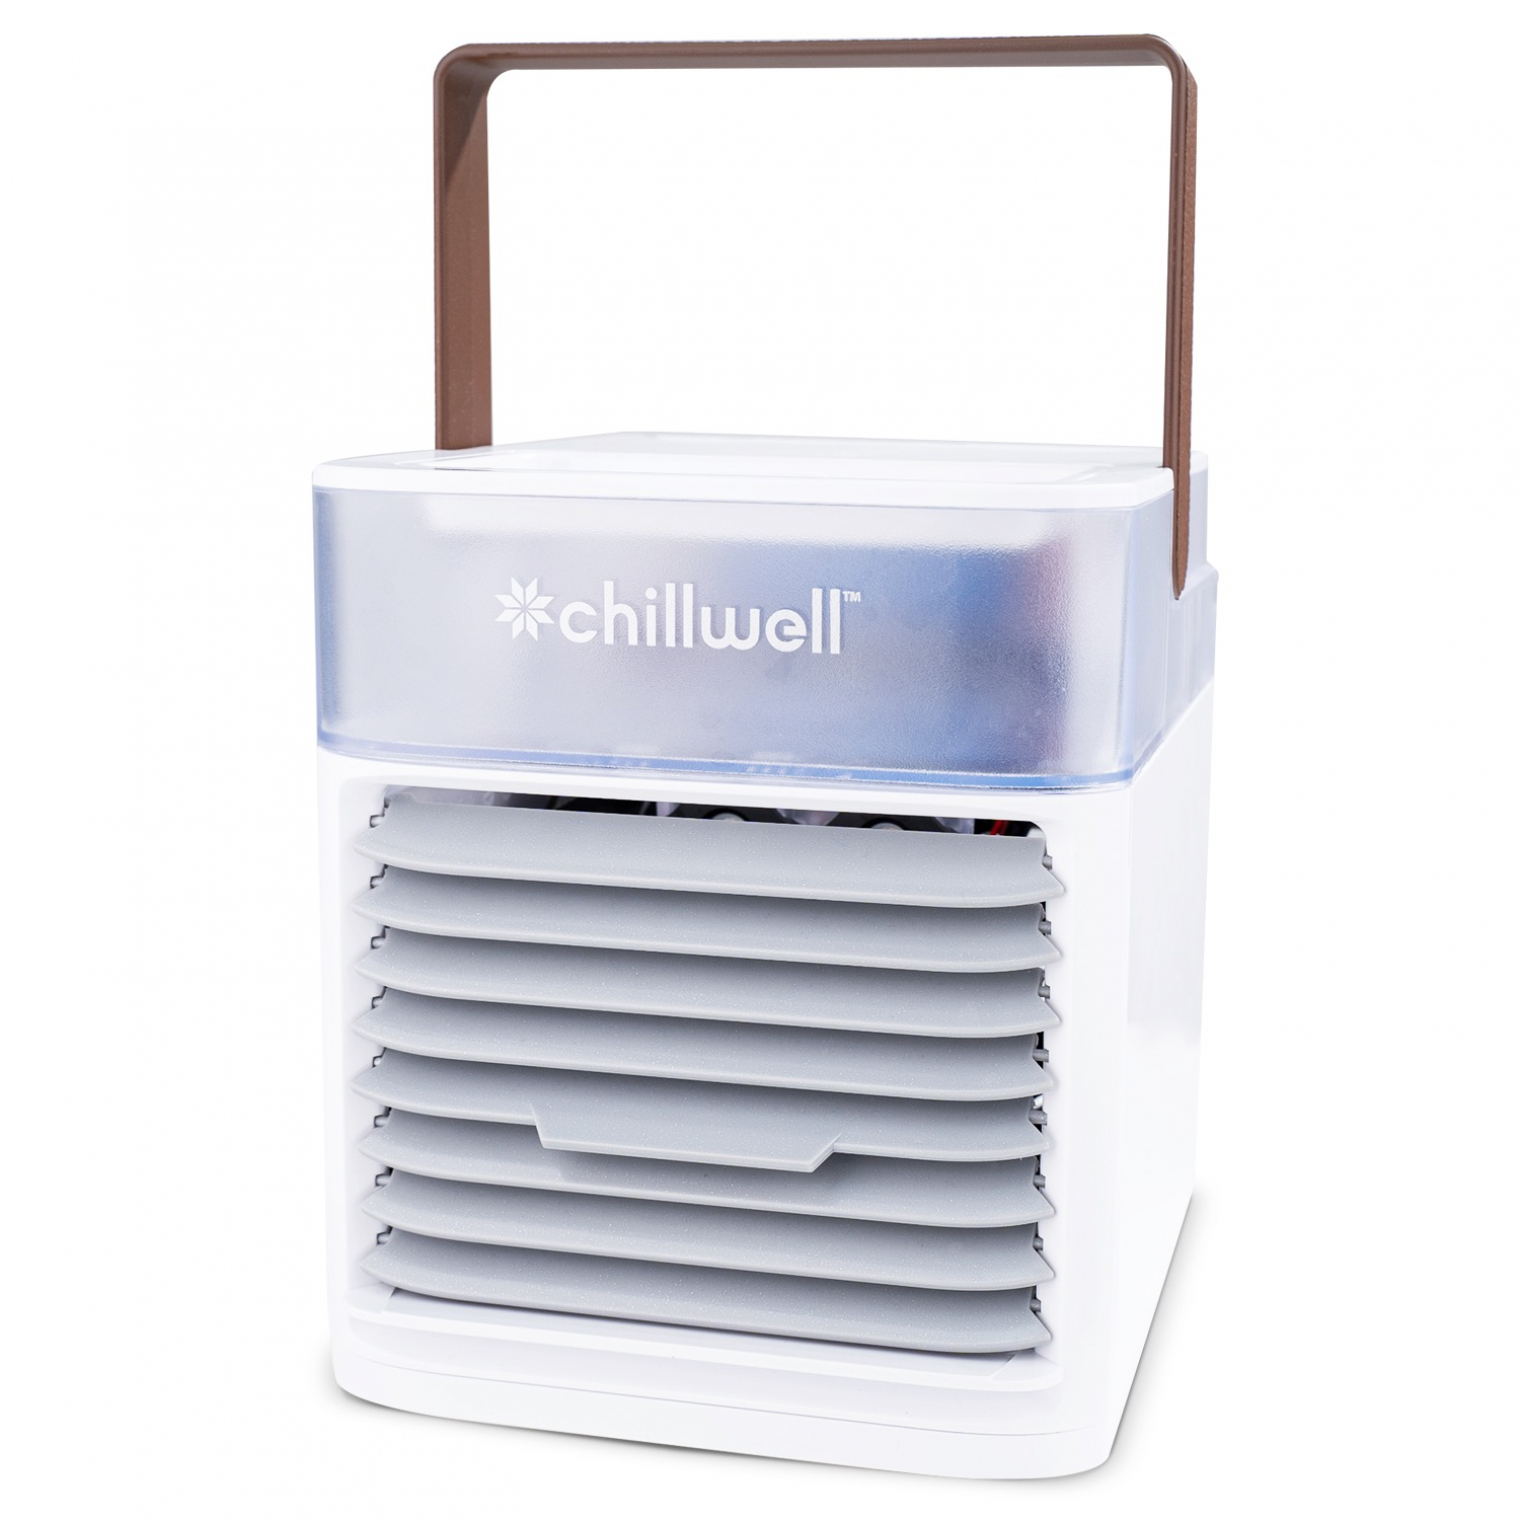 Chillwell AC Device Reviews